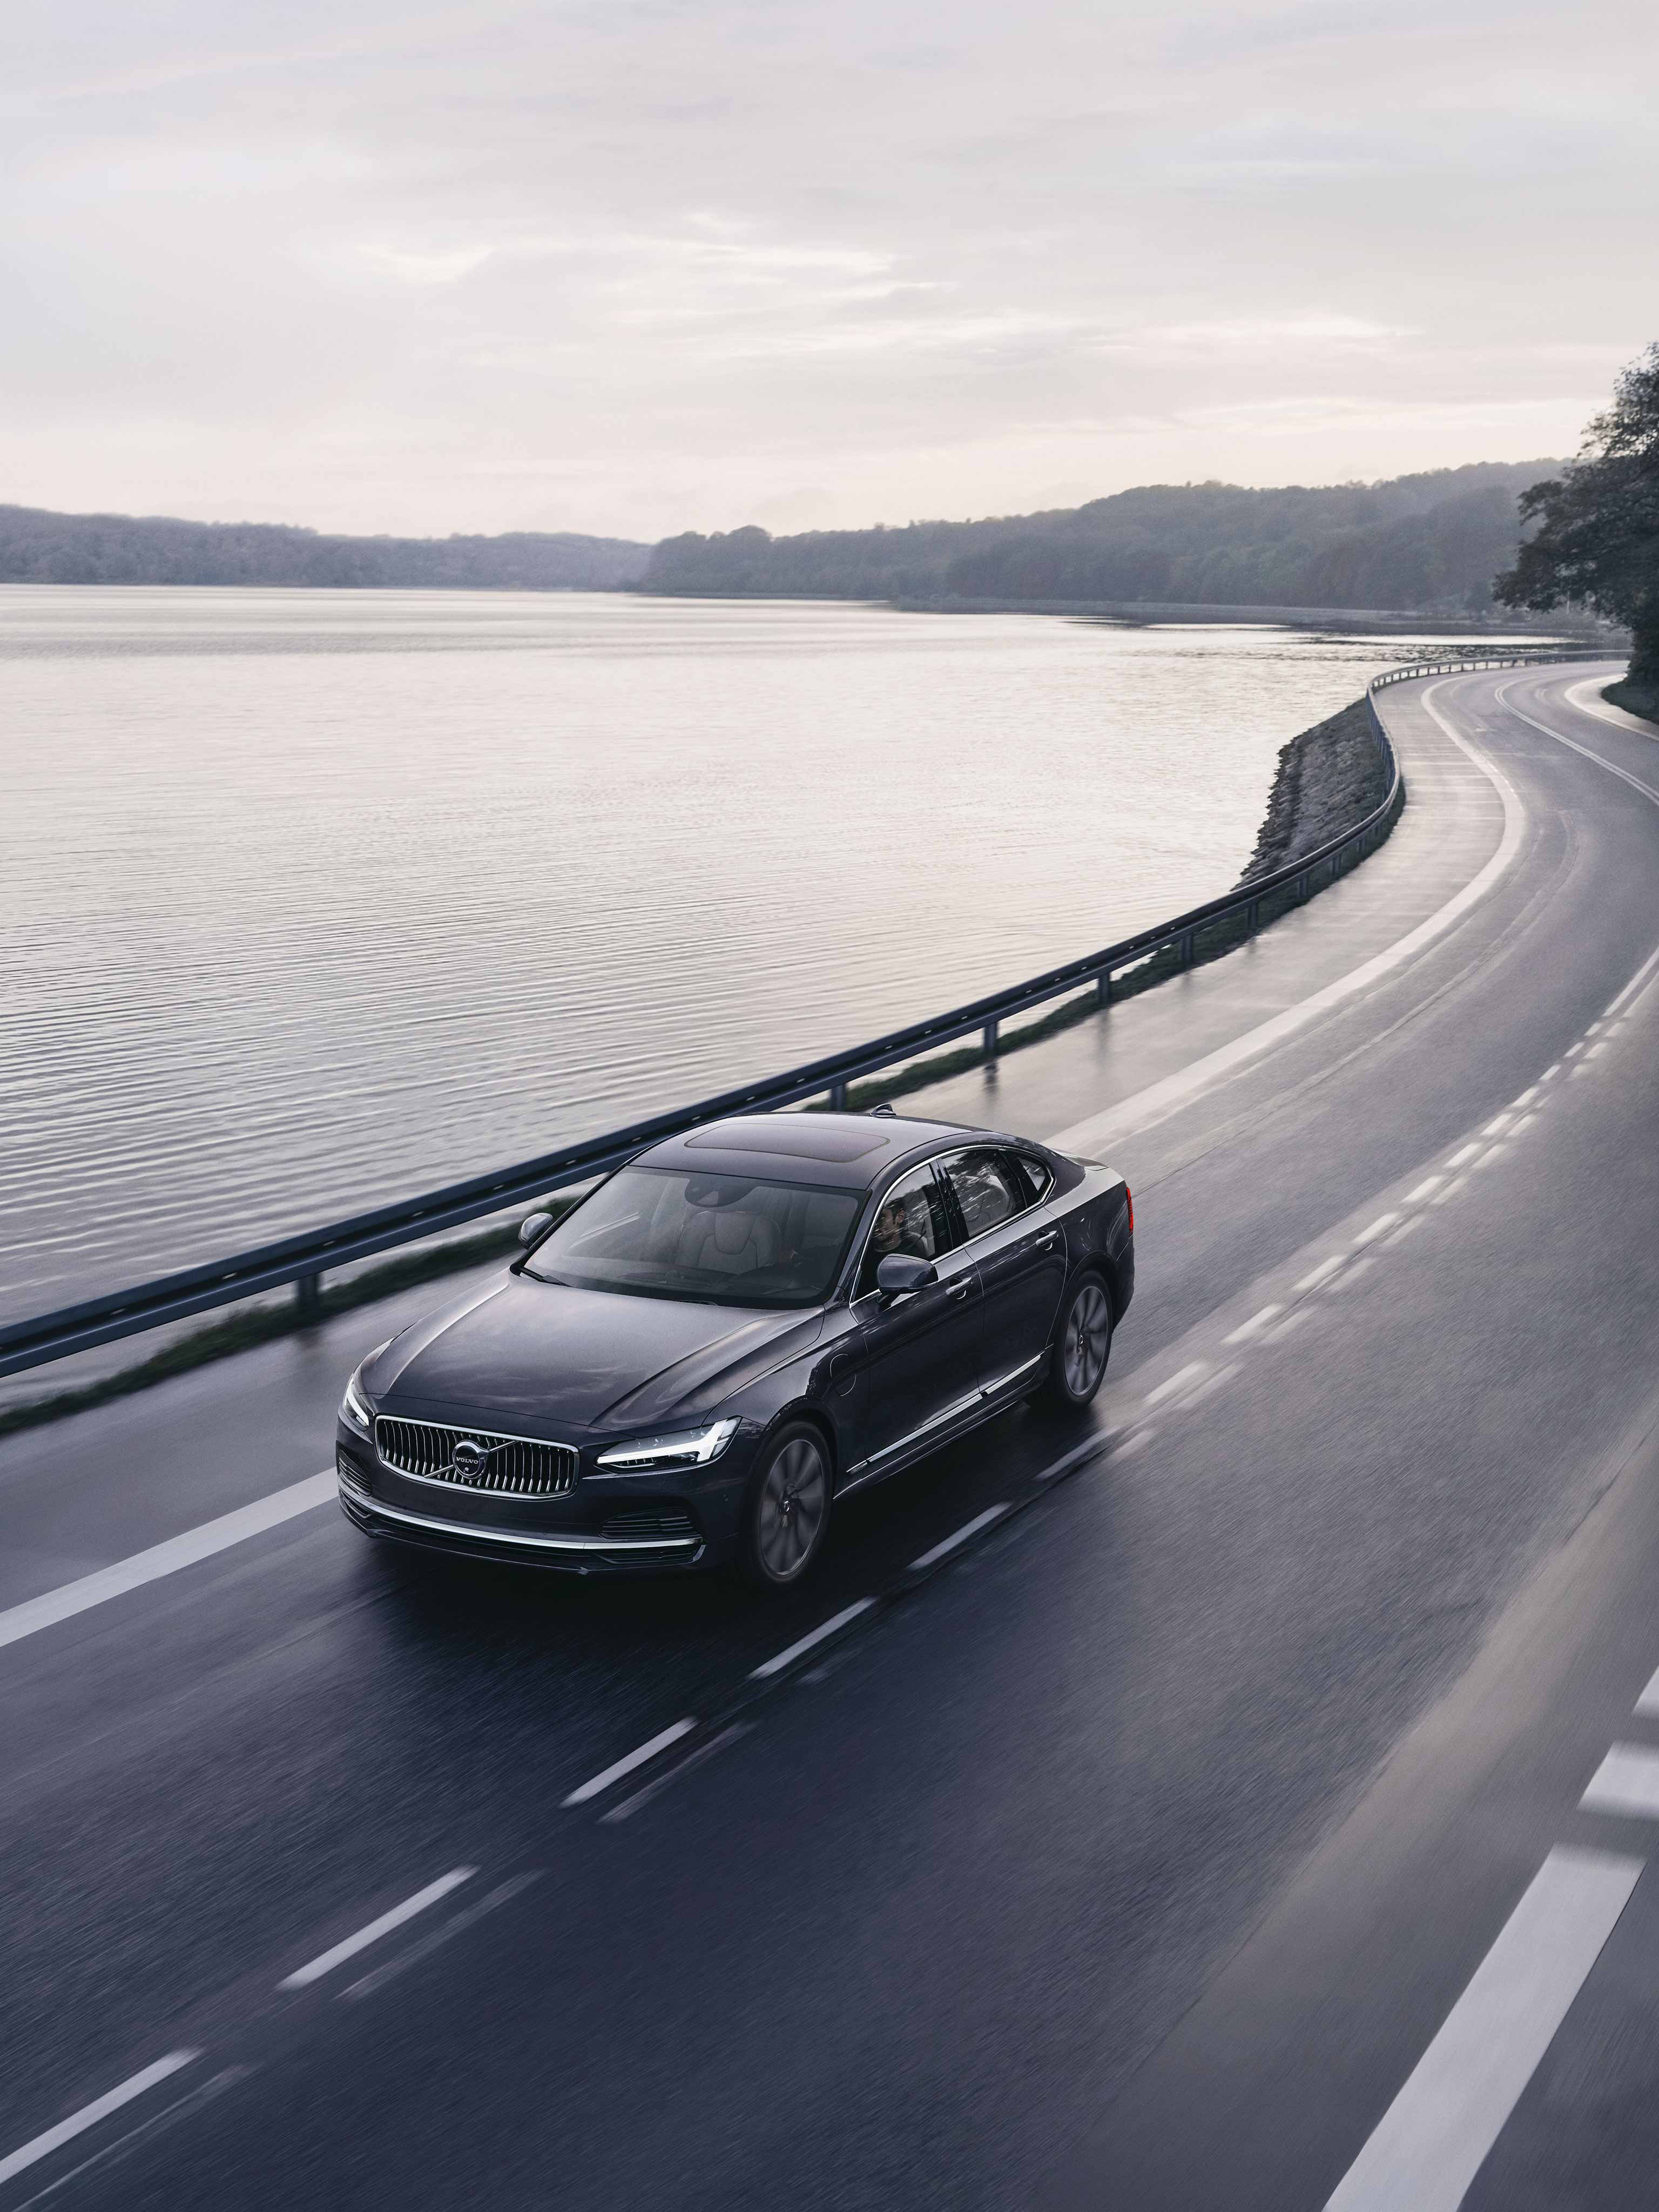 lack Volvo S90 driving by road by the lake.